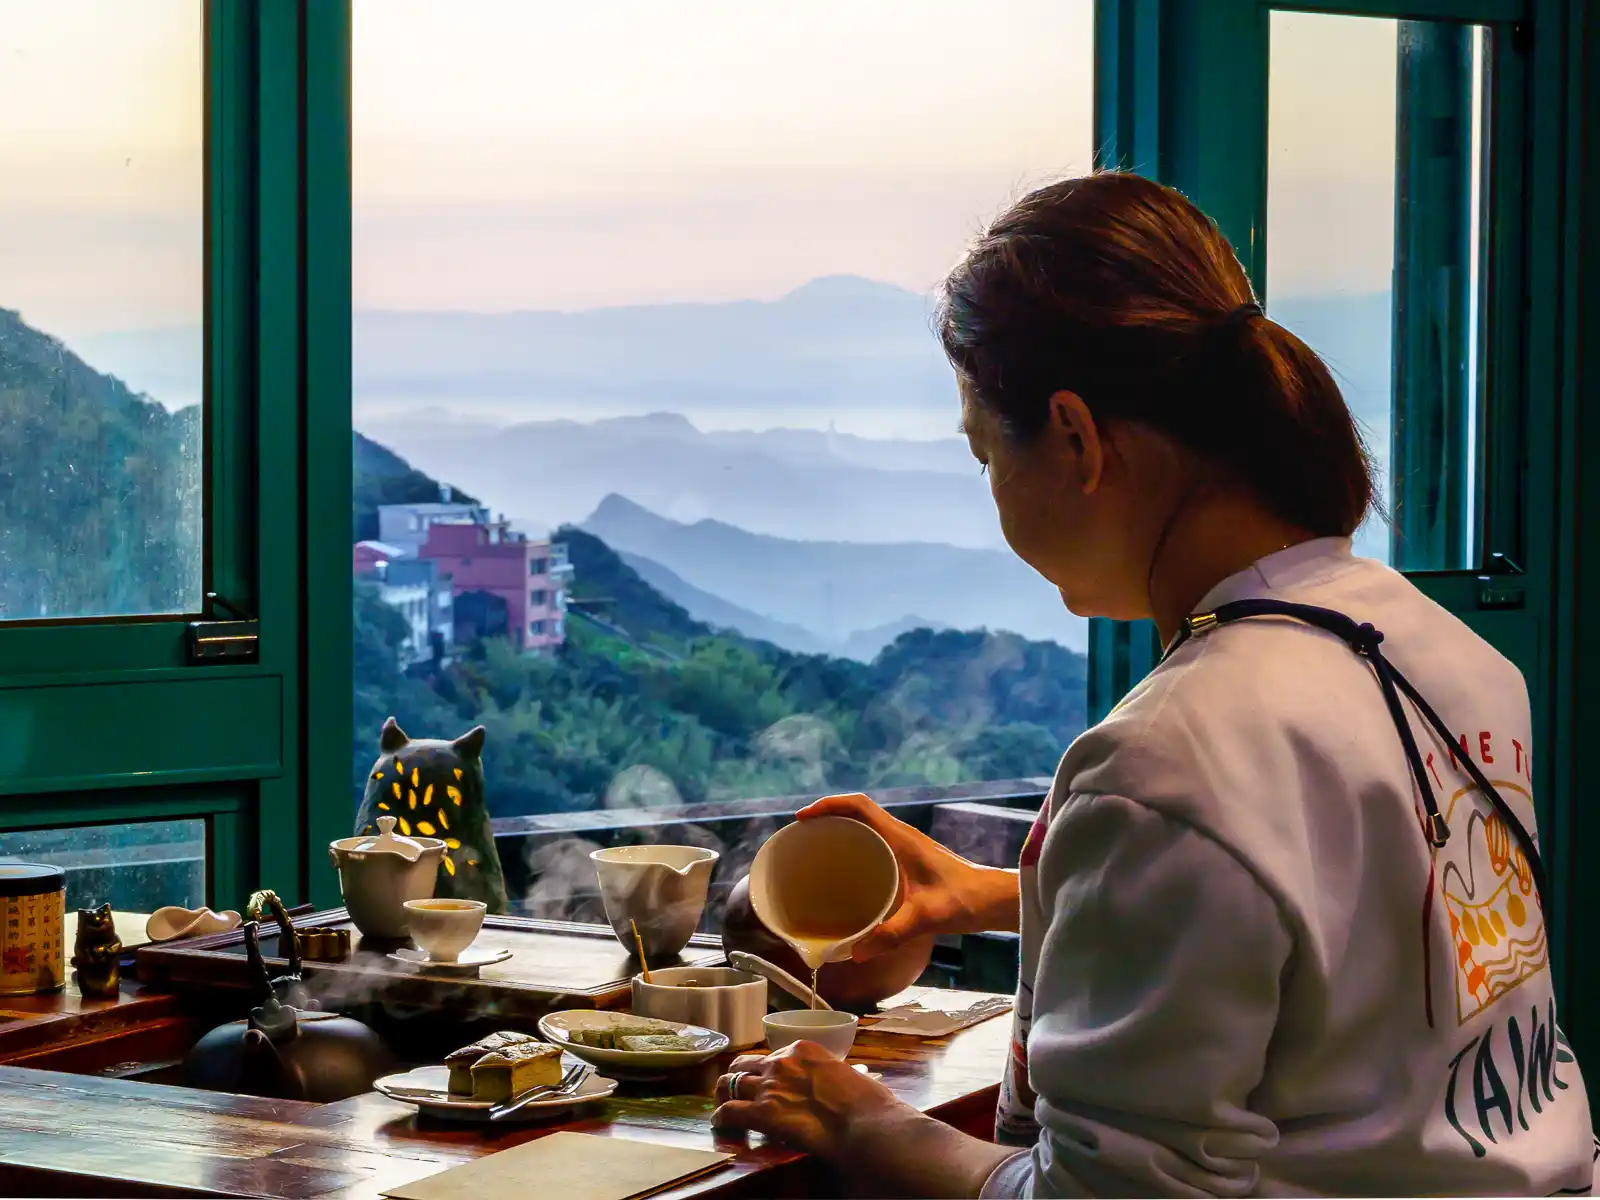 Tea is being brewed in front of a landscape of foggy mountains.